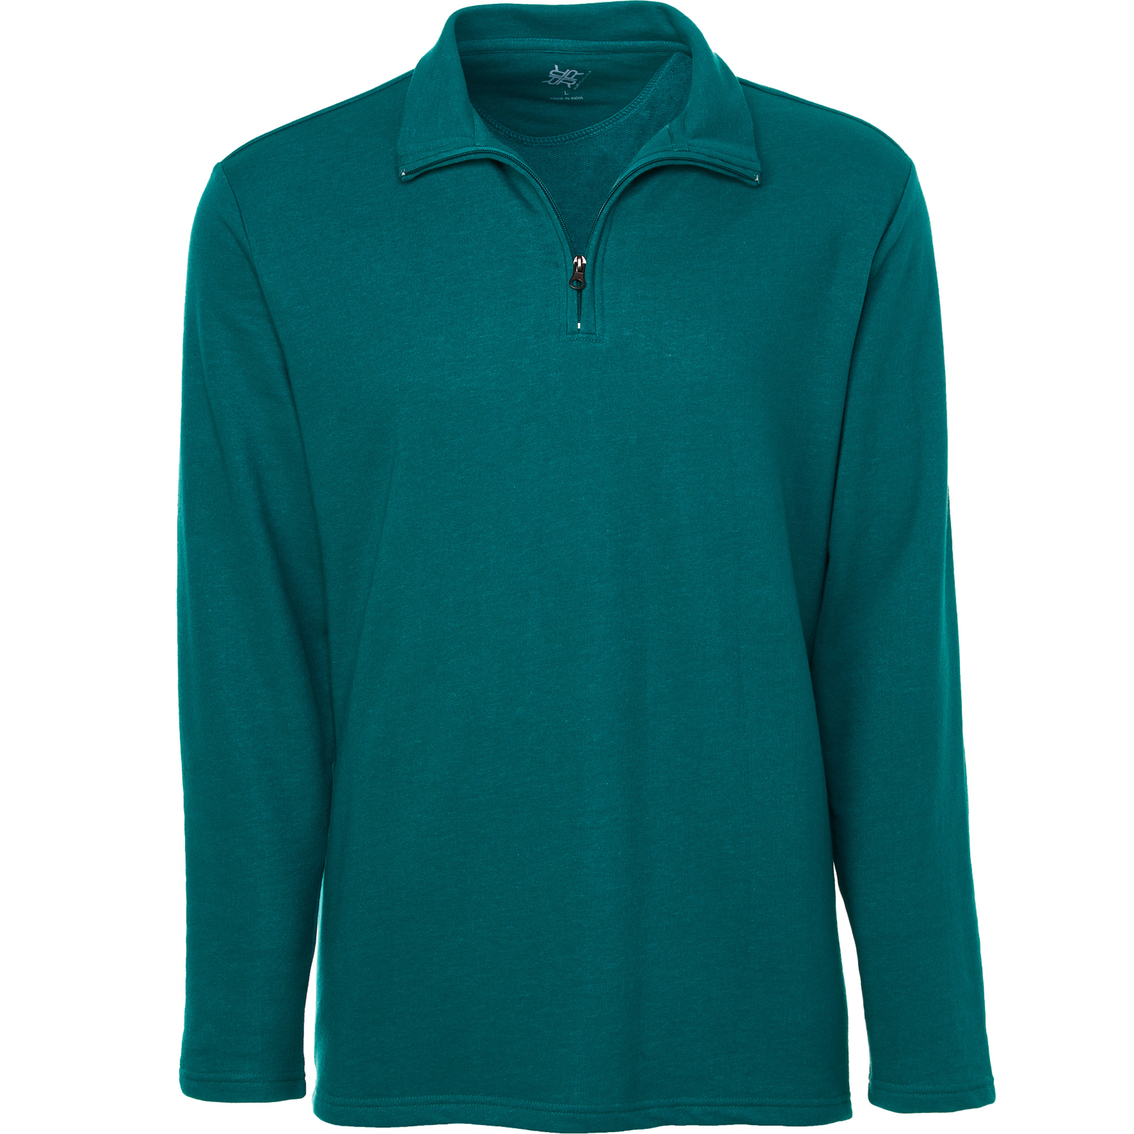 R&r Casual Quarter Zip Knit Top | Shirts | Clothing & Accessories